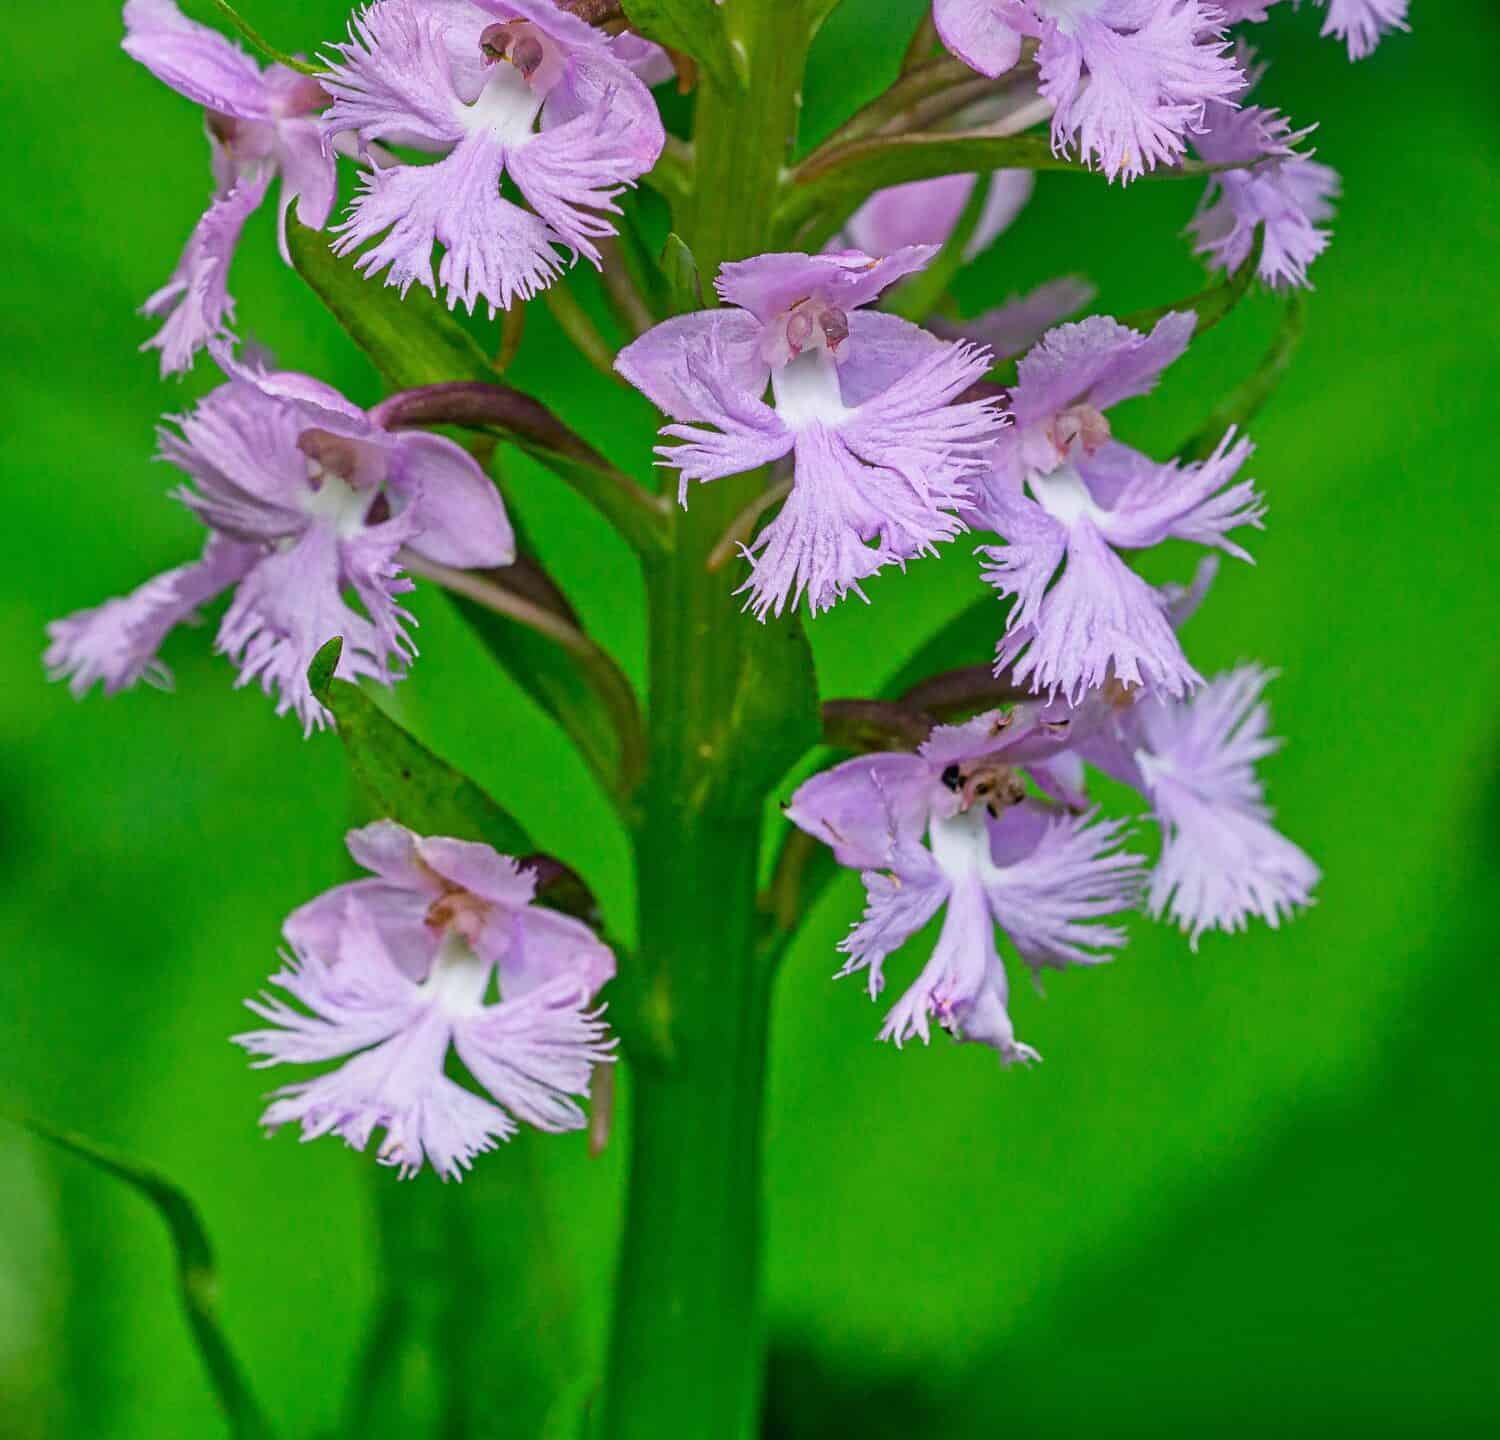 Macro photo of Lesser Purple Fringed Orchid, Platanthera psycodes with its showy fringed lavender purple petals. Detailed view of the flowers with a green background. 